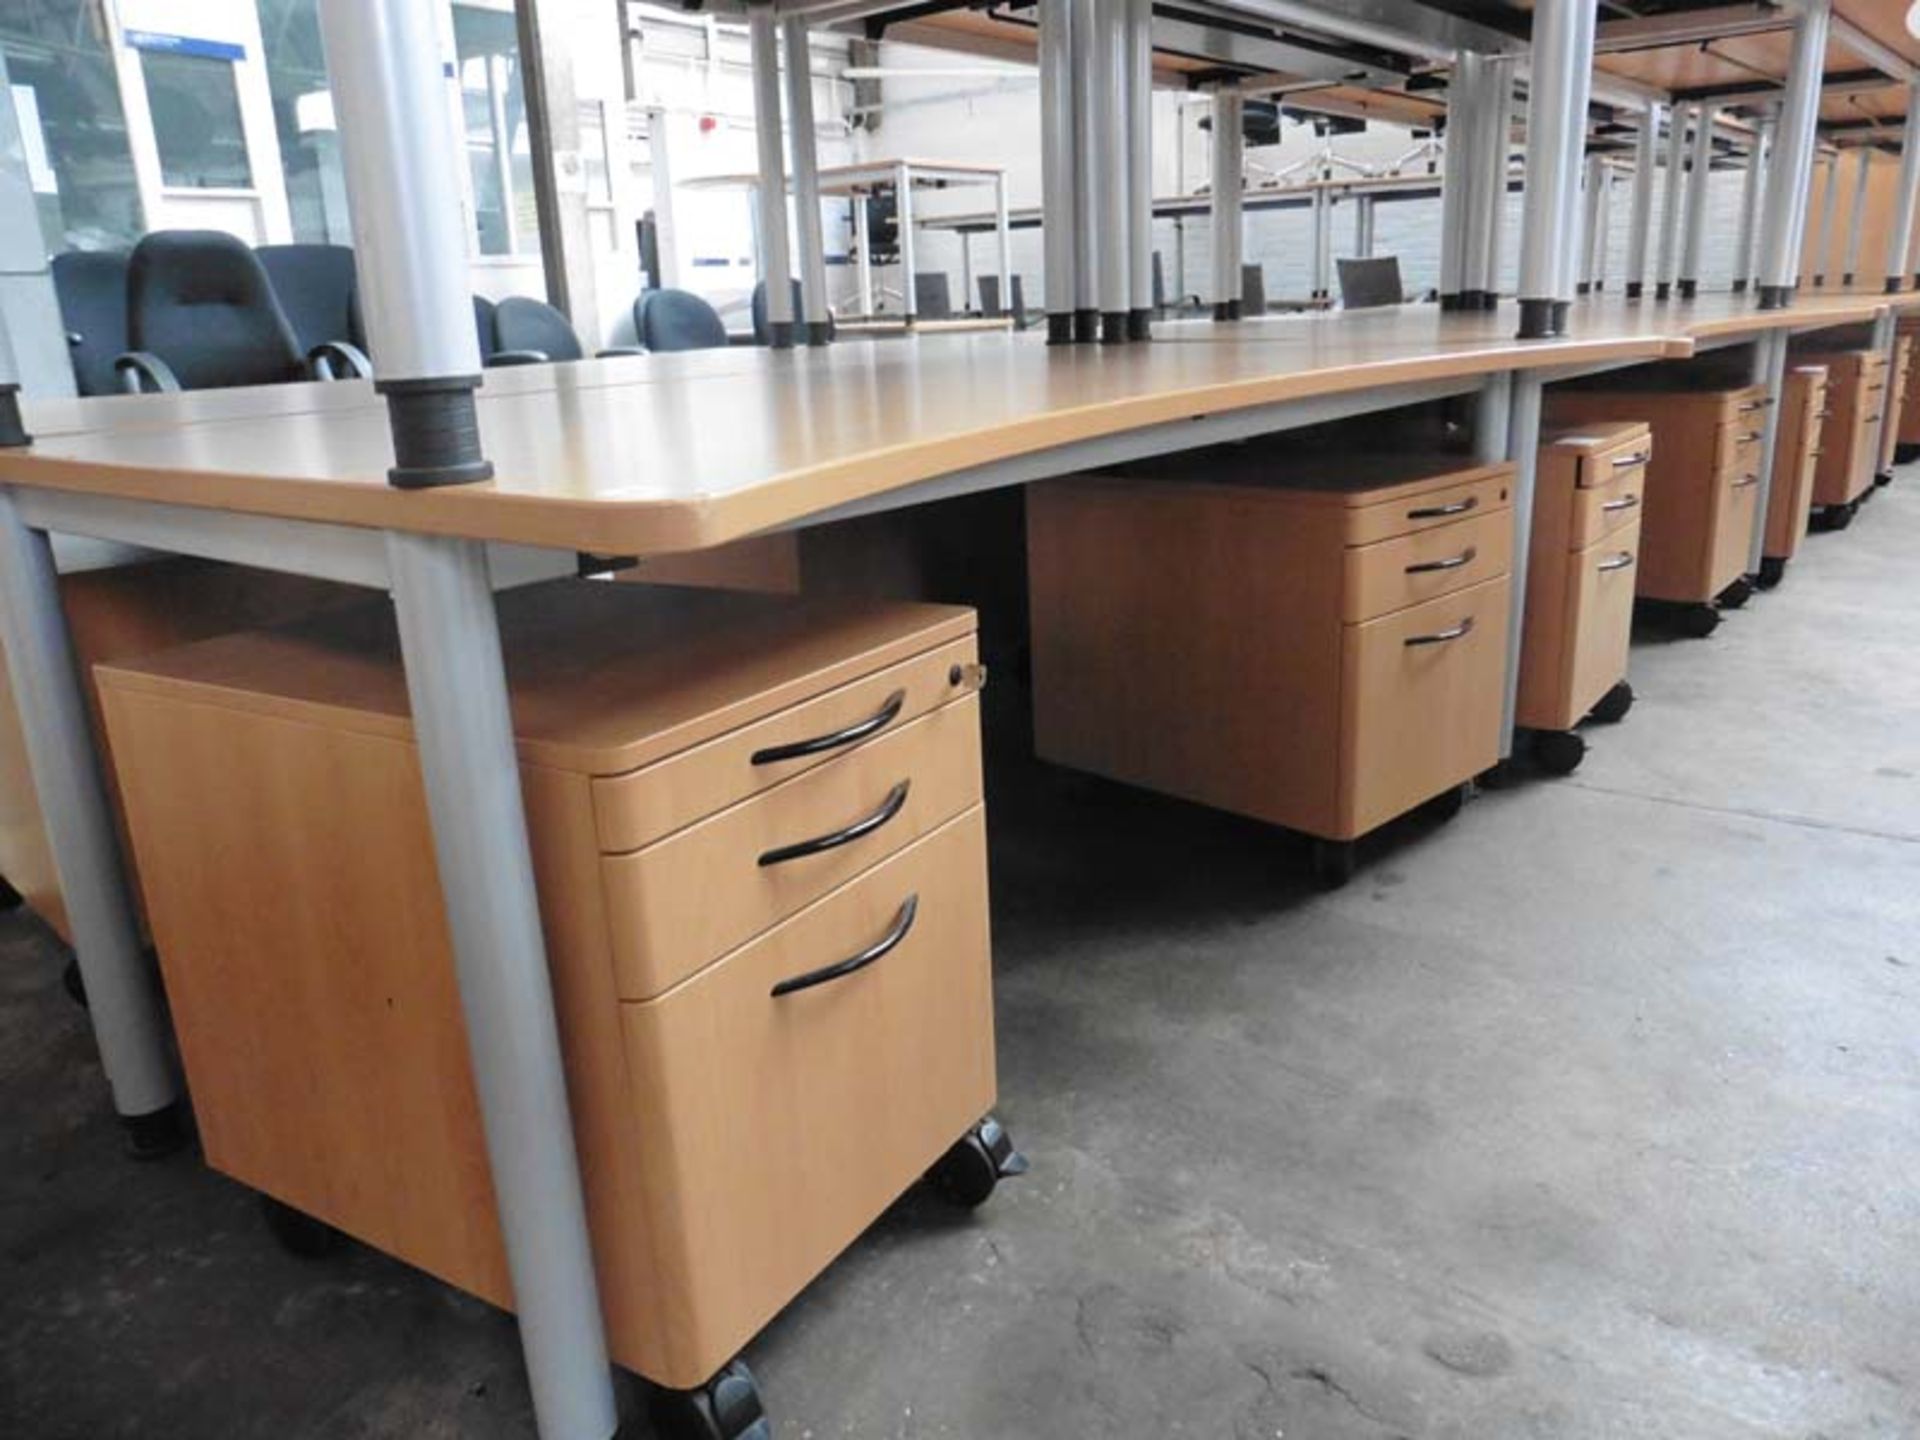 Bank of 5 Werndl beech finish concave fronted work stations on grey tubular legs, each with matching